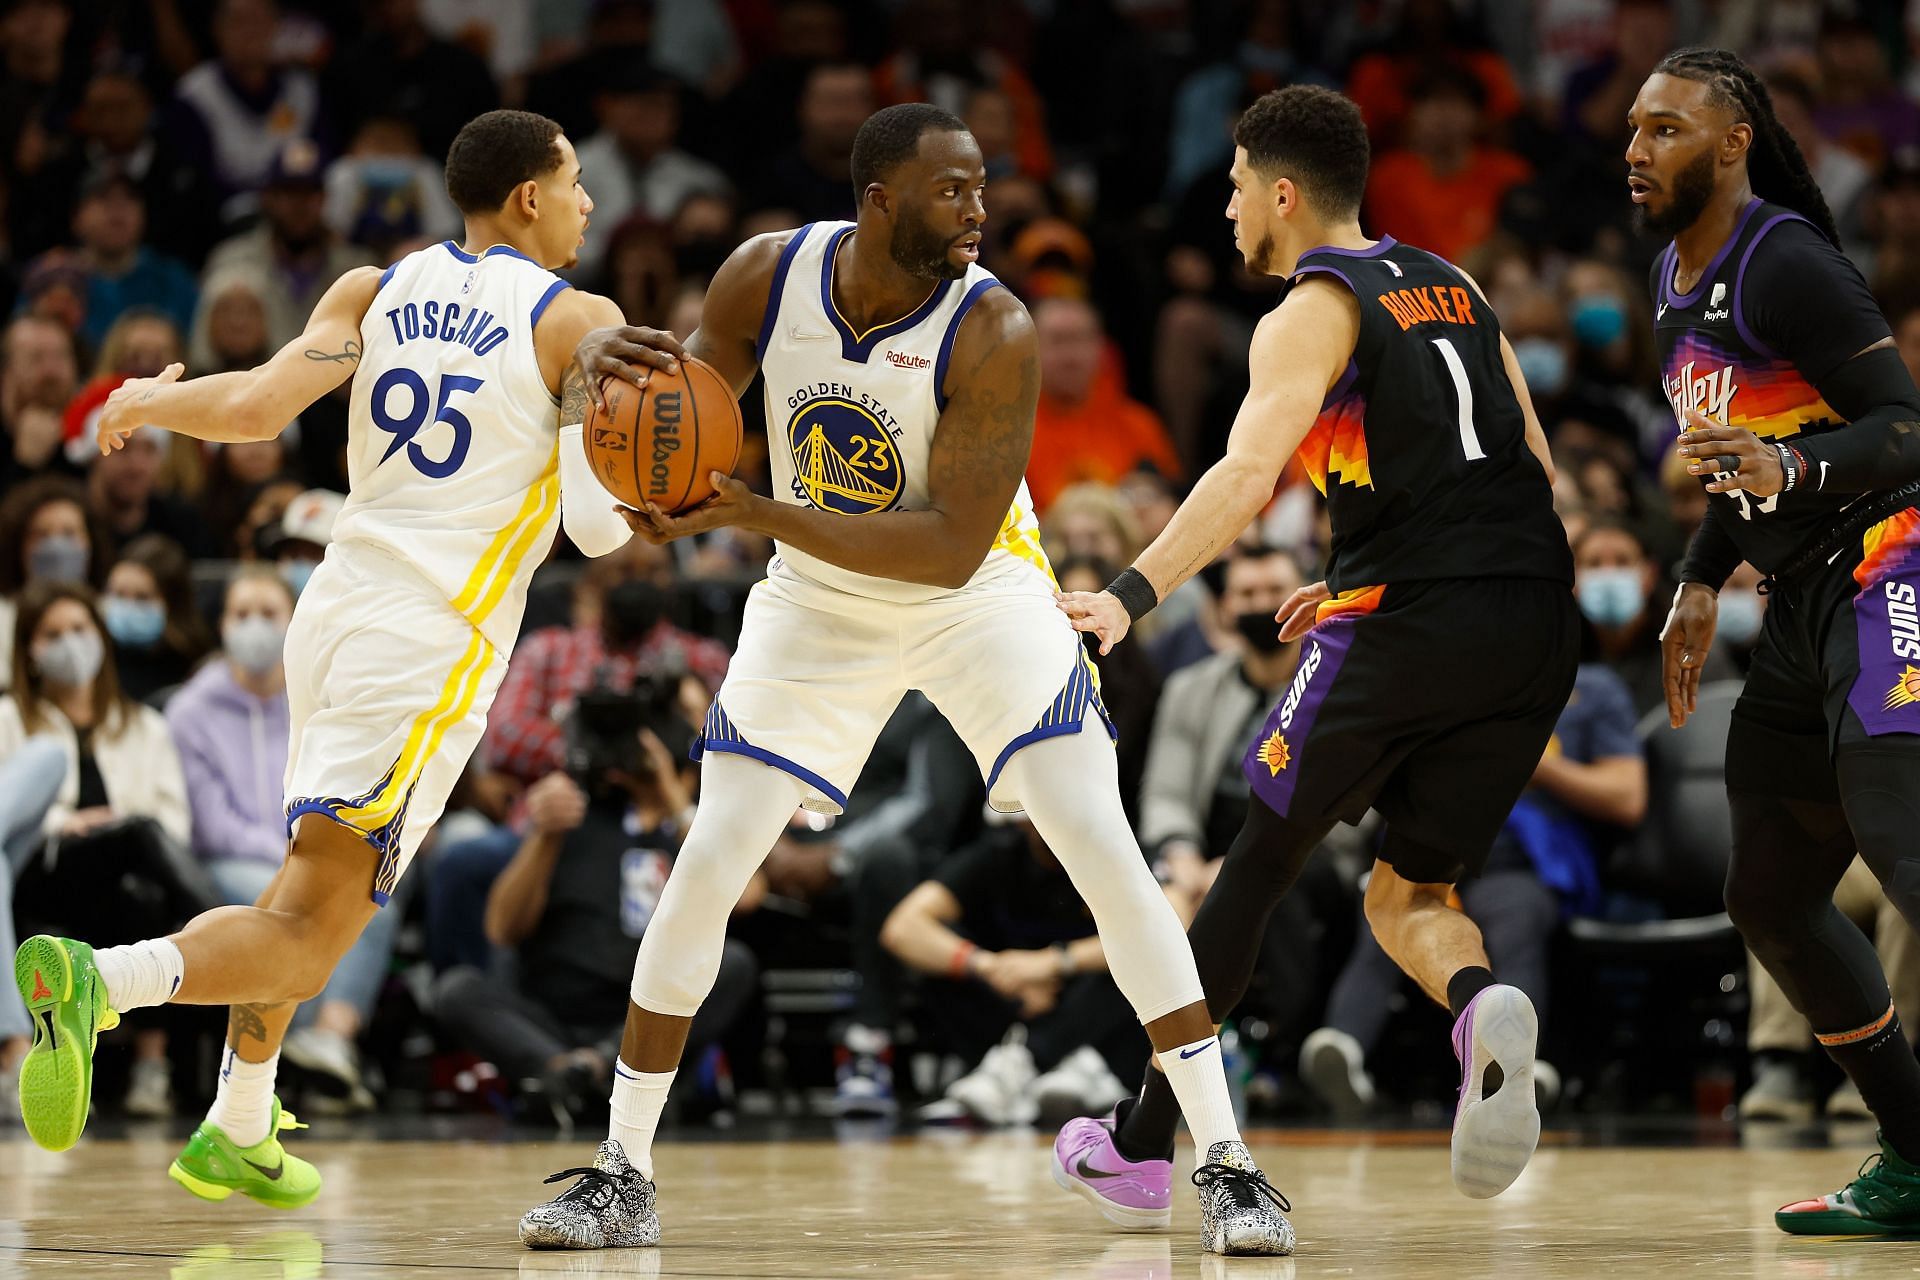 Draymond Green and Jae Crowder exchanged words after the Golden State Warriors lost to the Phoenix Suns on Wednesday